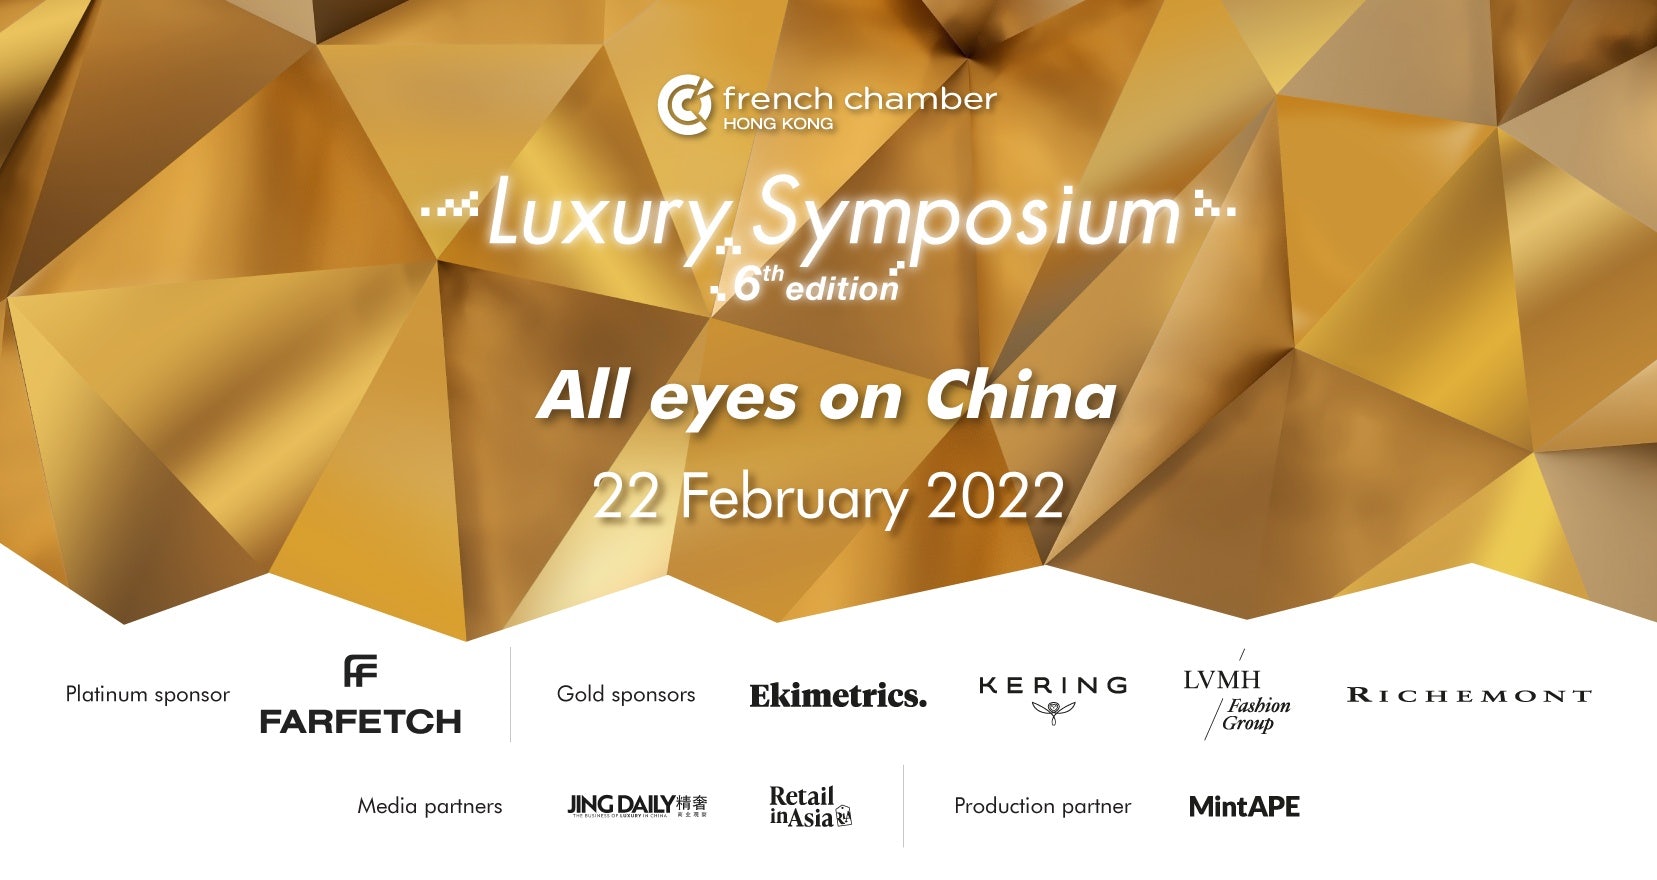 Featuring the topic "All eyes on China," the Luxury Symposium 2022 saw a diverse range of keynote talks, fireside chats, and panel discussions tackle the most pressing questions facing luxury brands in China. Photo: Courtesy of the French Chamber in Hong Kong